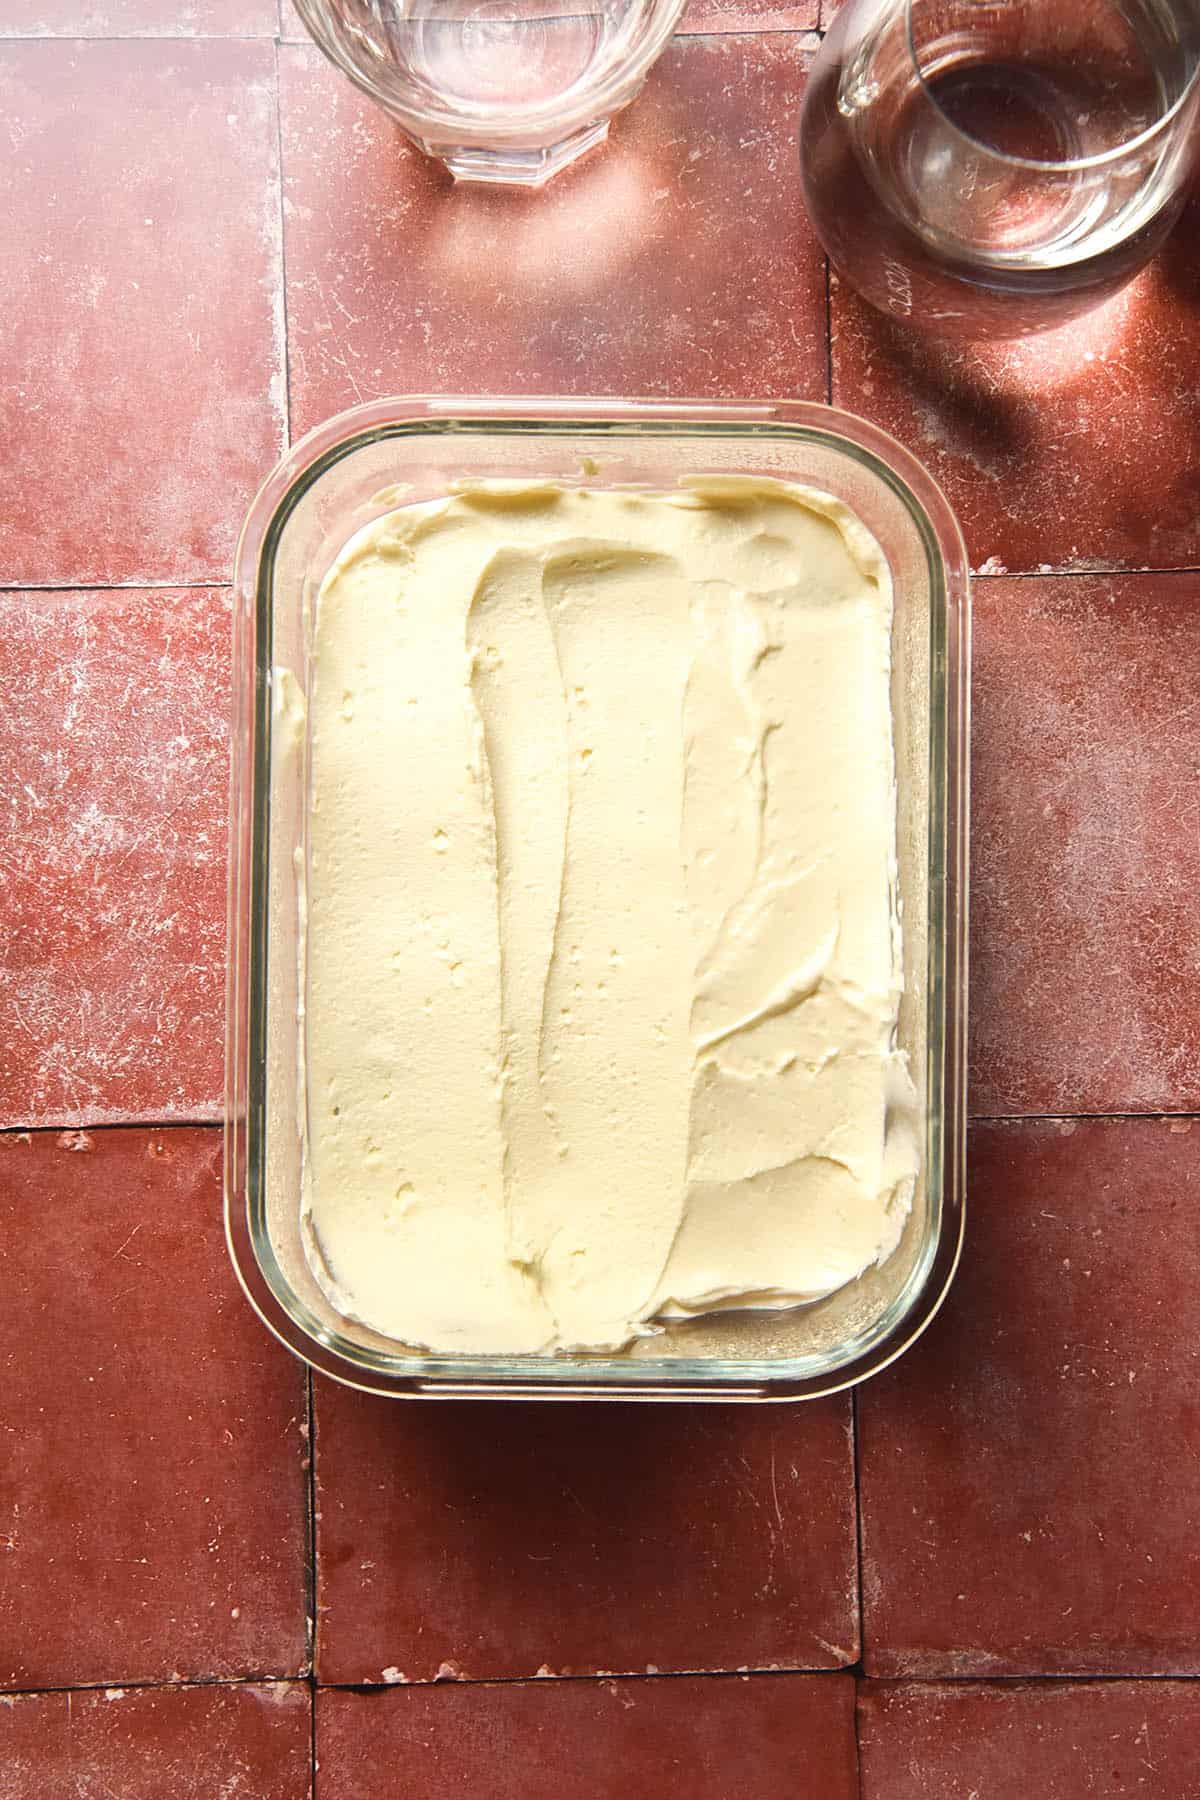 An aerial view of a glass container filled with lactose free cream cheese on a terracotta tile backdrop. Two glasses of water sit to the top right of the image